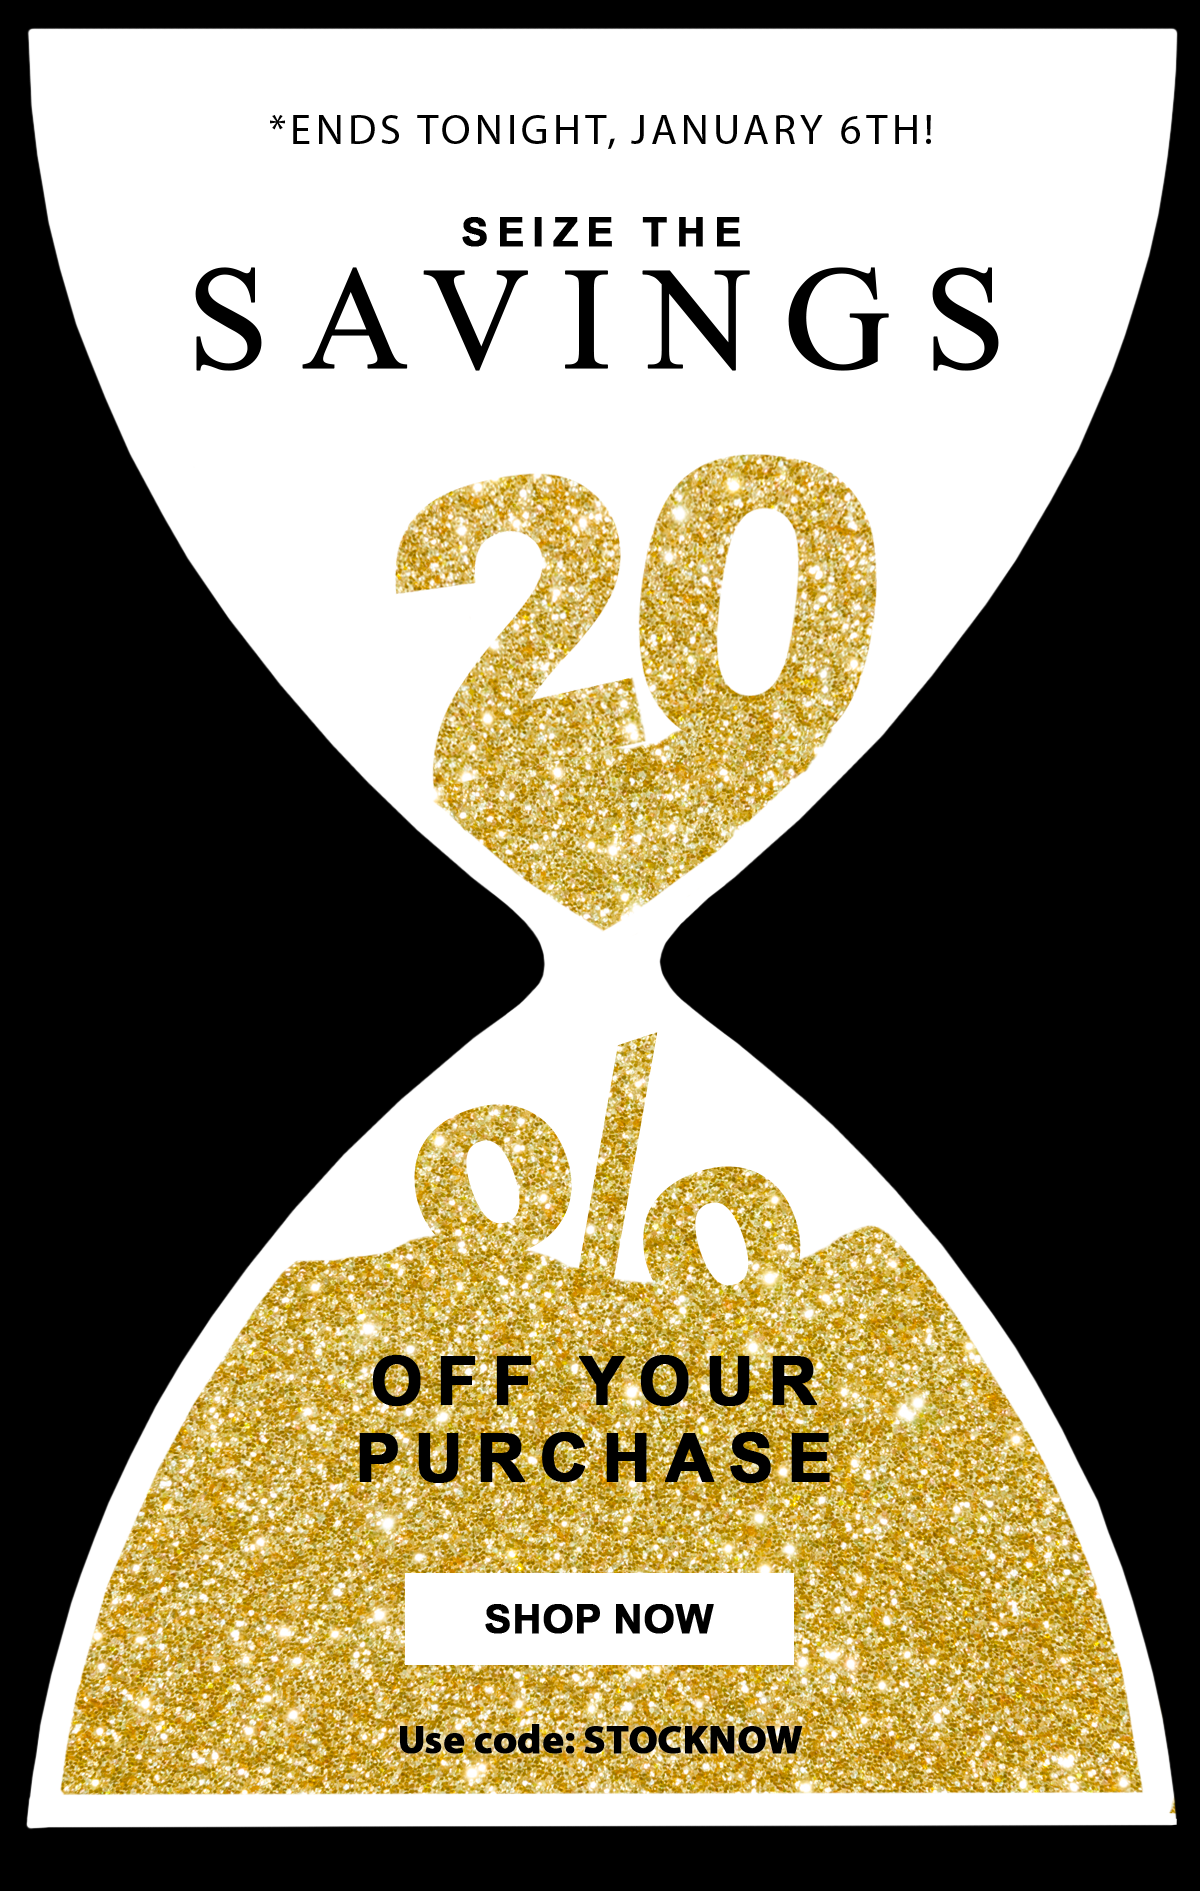 *Ends tonight, January 6th! Seize the Savings 20% Off Your Purchase Shop Now Use code: STOCKNOW